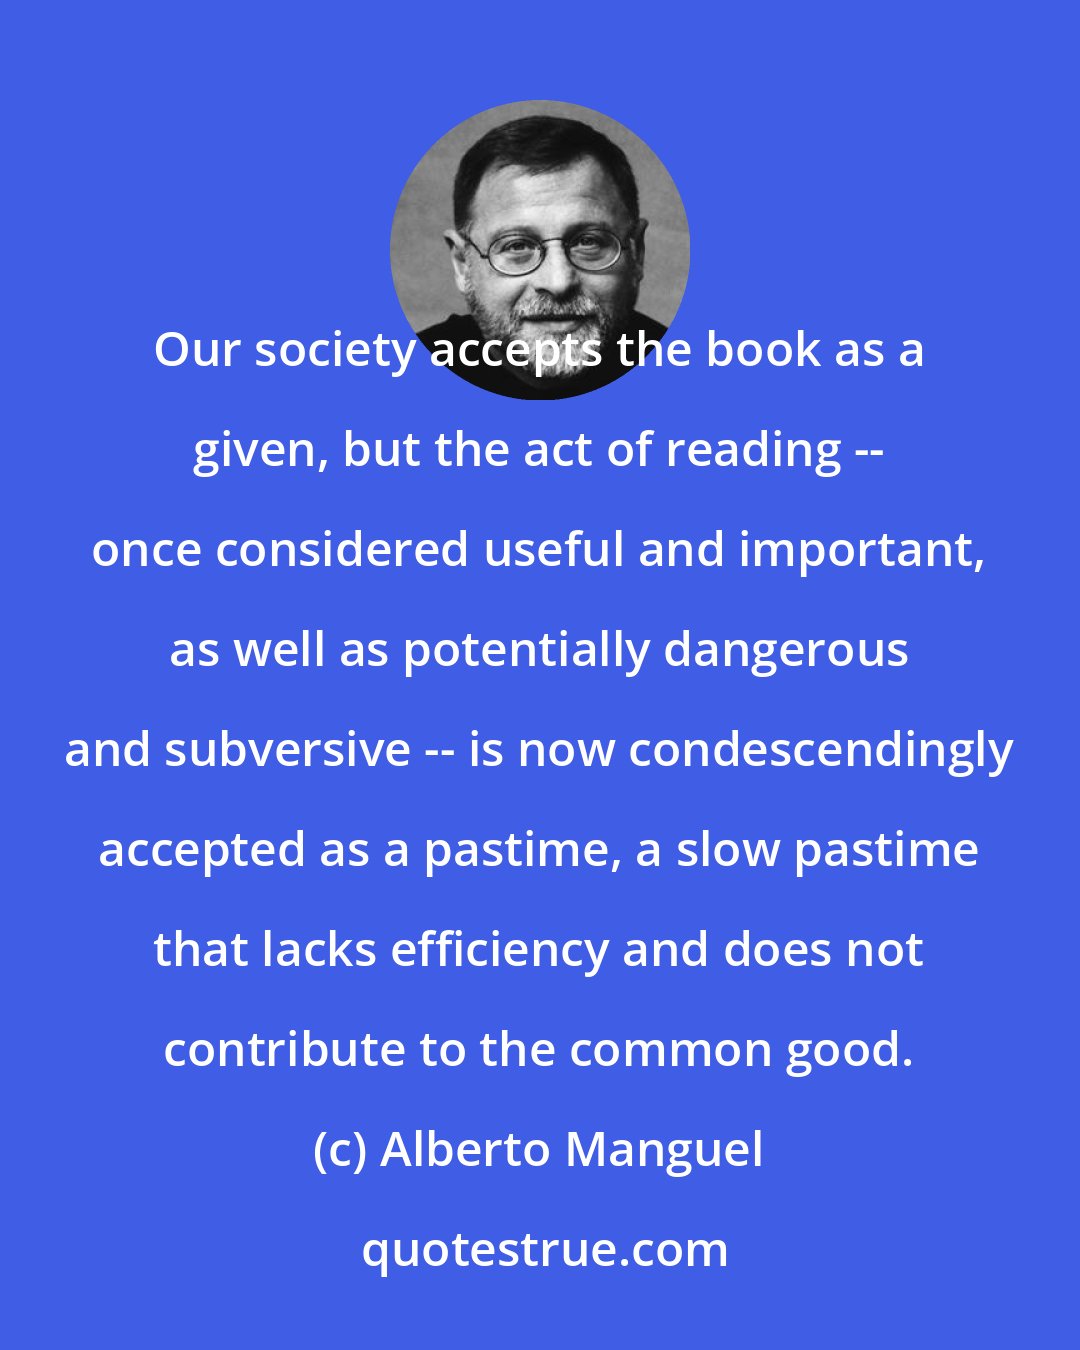 Alberto Manguel: Our society accepts the book as a given, but the act of reading -- once considered useful and important, as well as potentially dangerous and subversive -- is now condescendingly accepted as a pastime, a slow pastime that lacks efficiency and does not contribute to the common good.